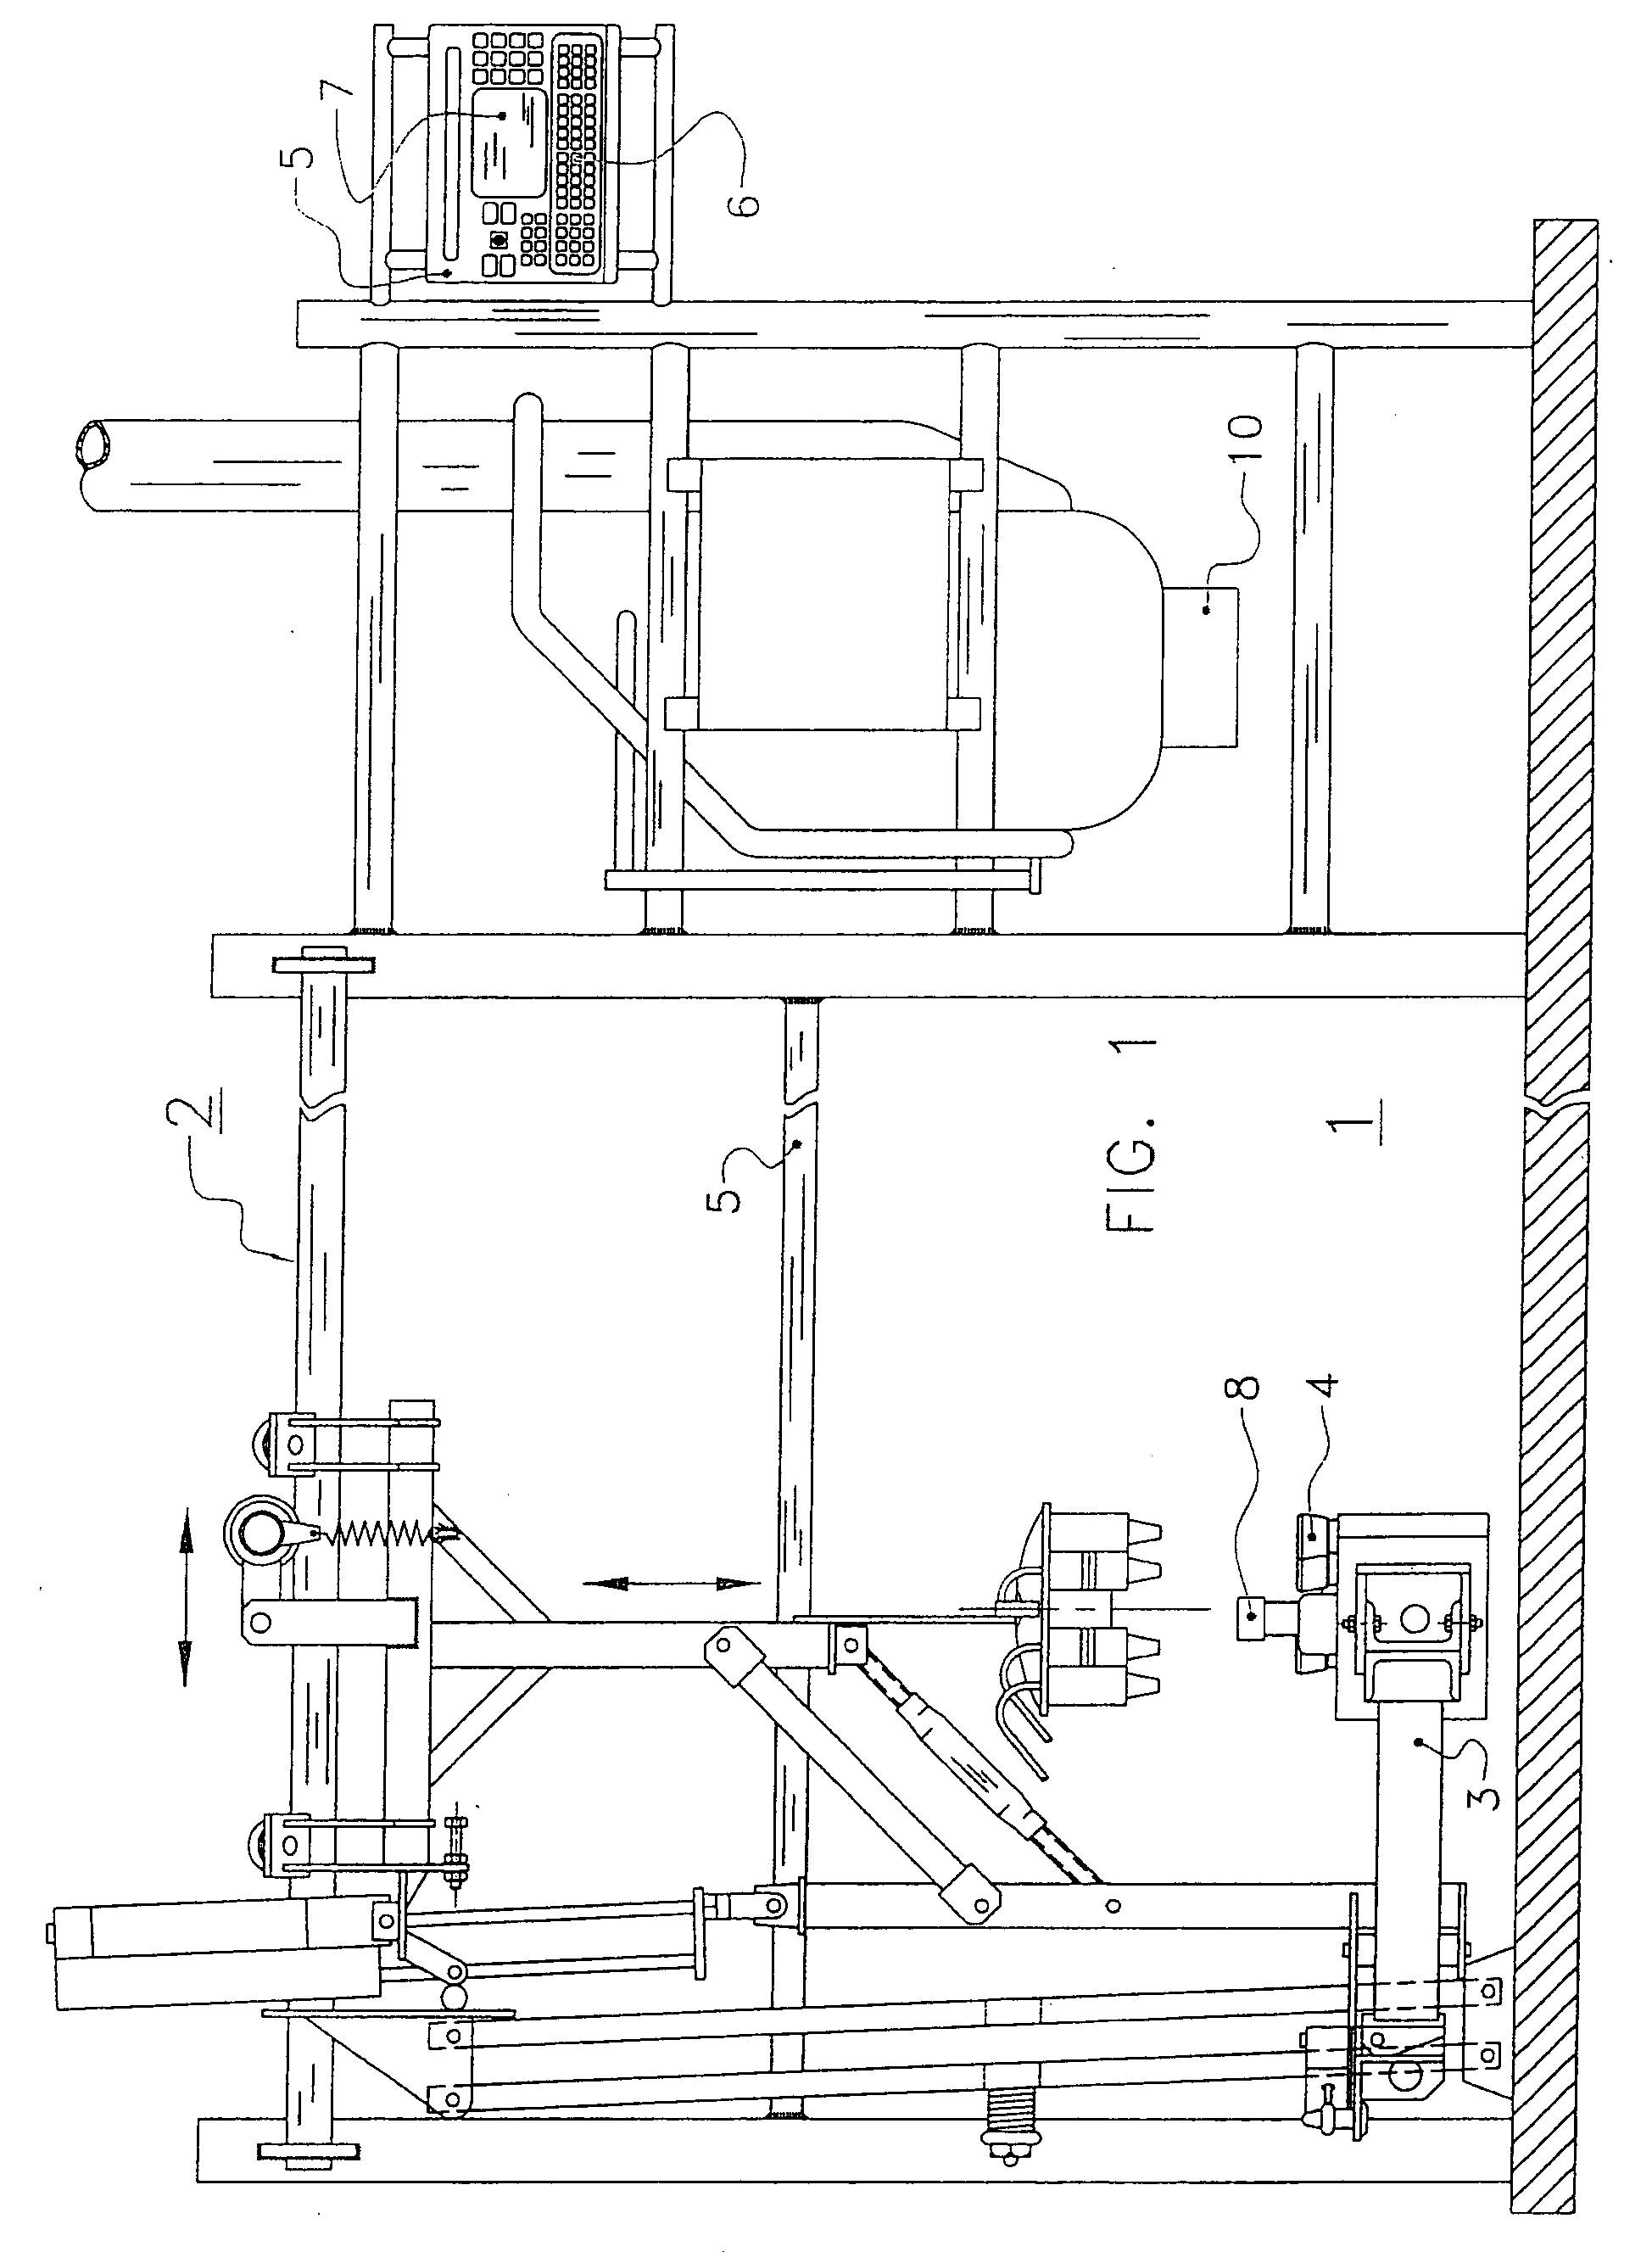 Device and method for determining teat positions